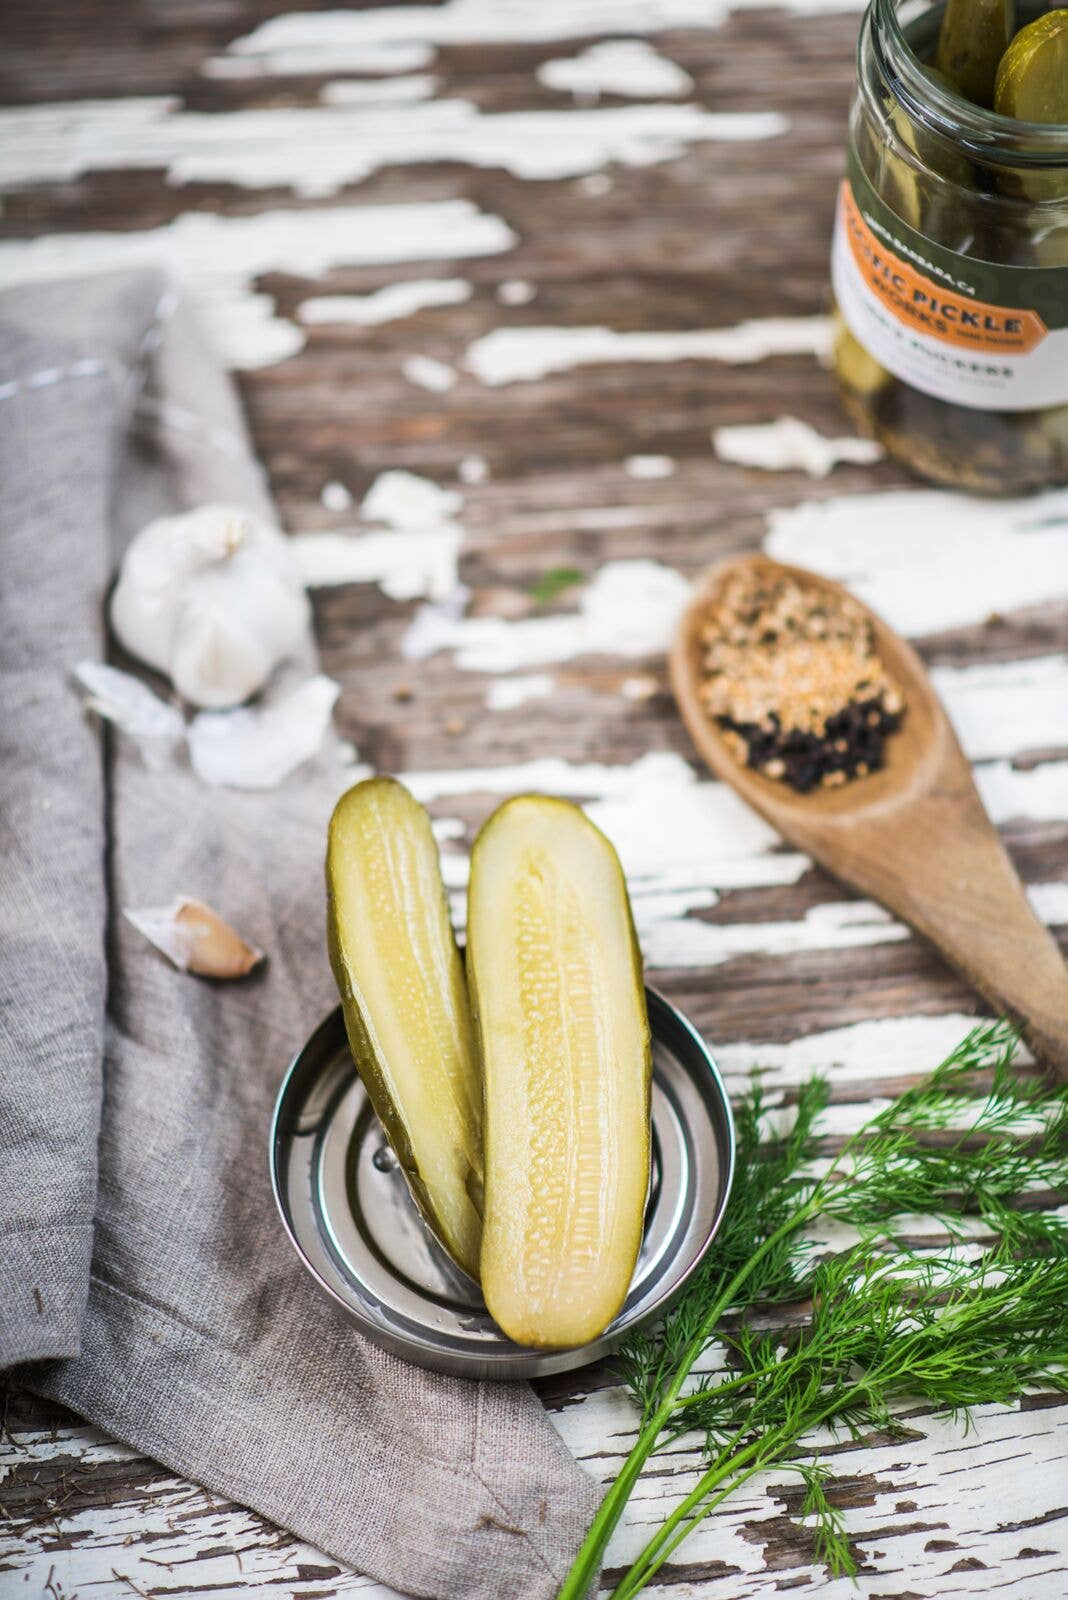 Mother's Puckers - Home-style Garlic Dill Pickles